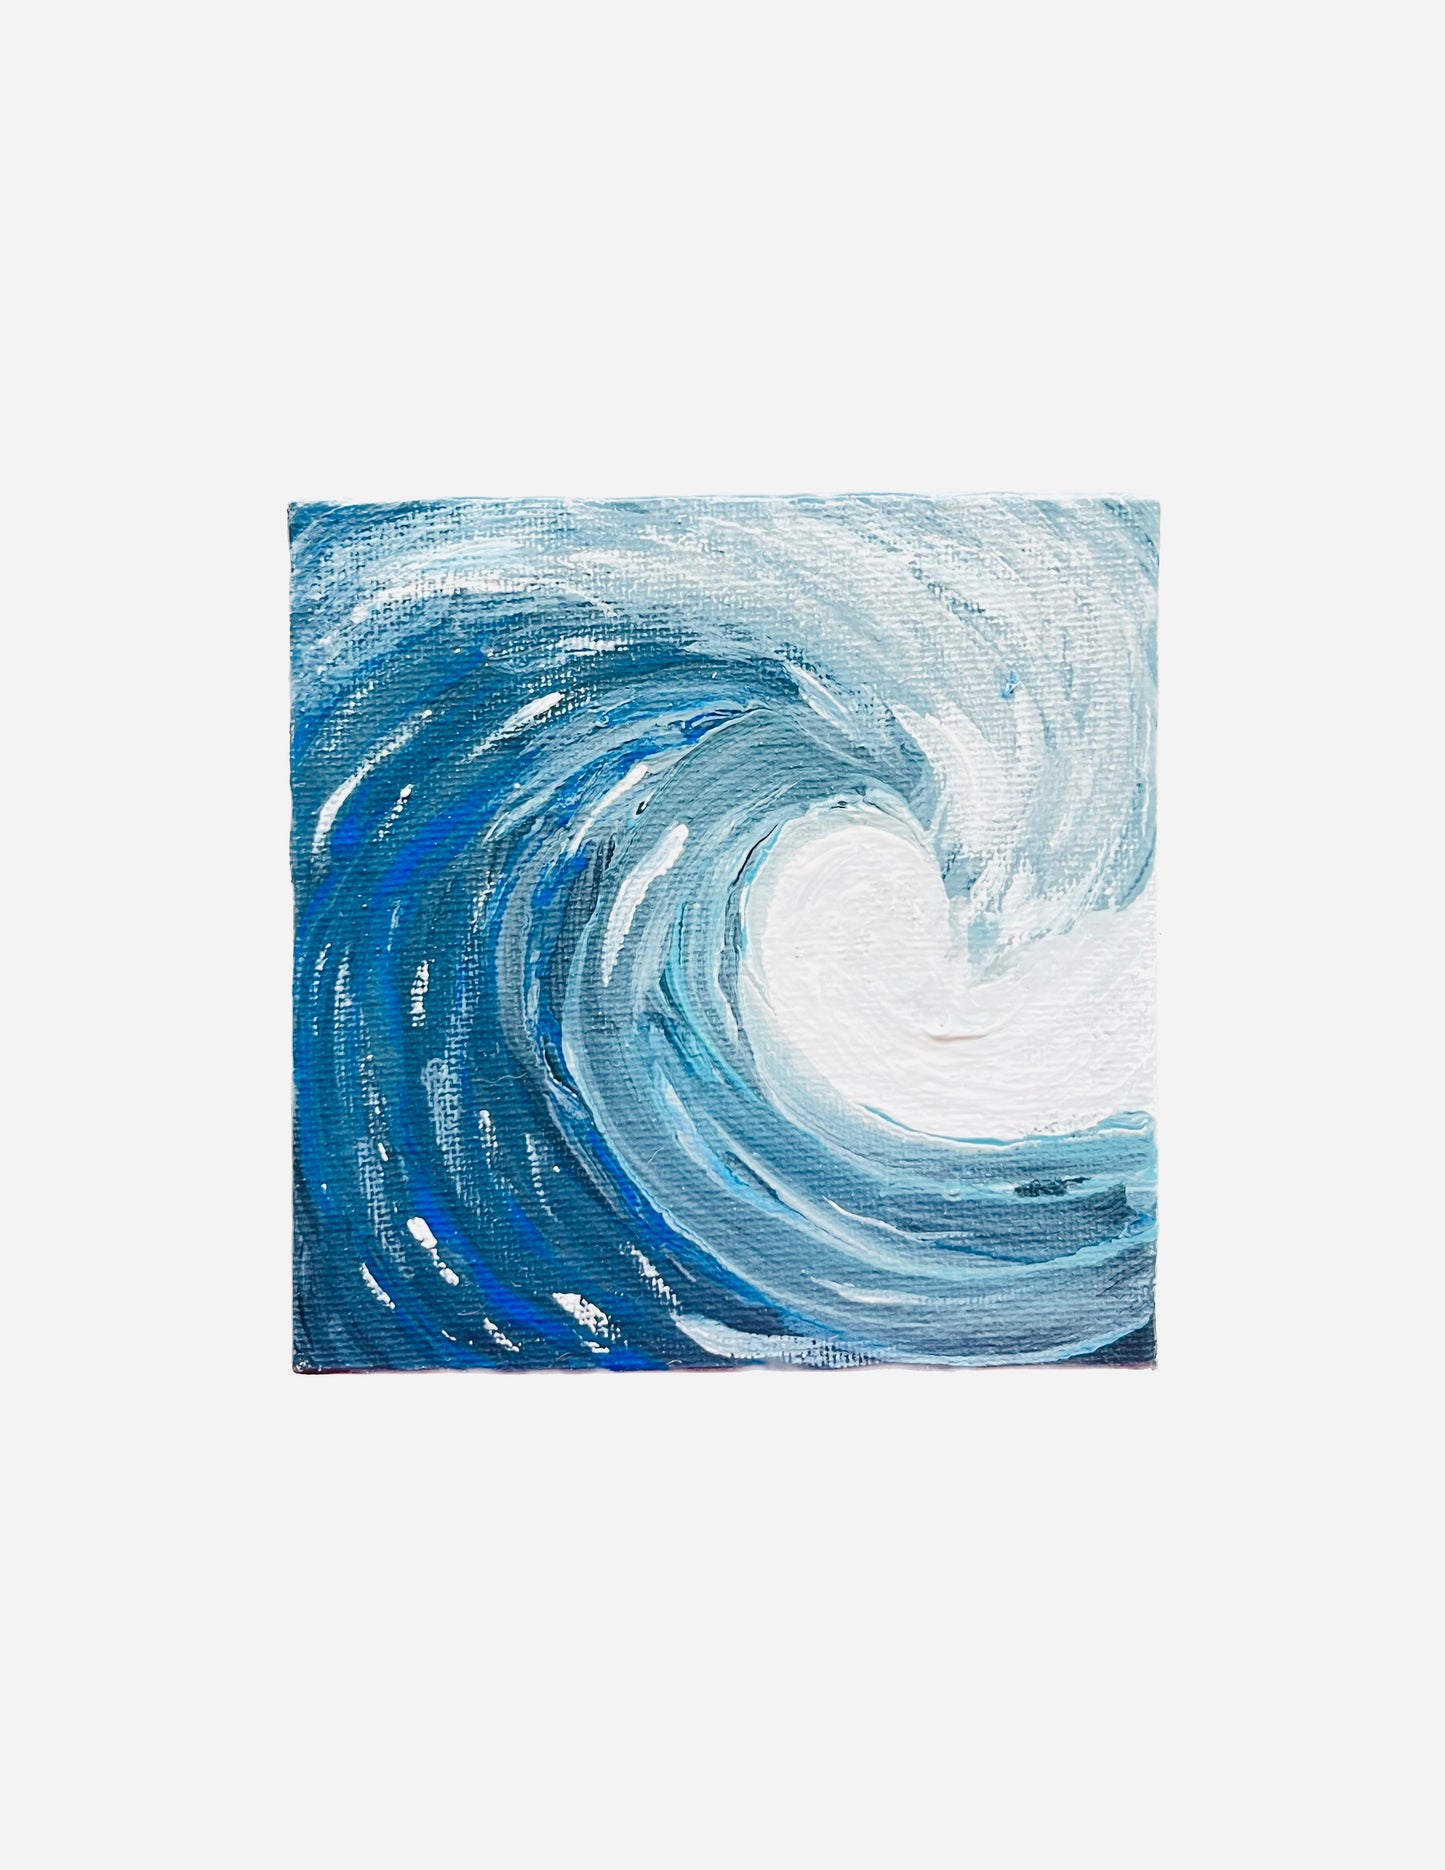 The Blue Wave Painting